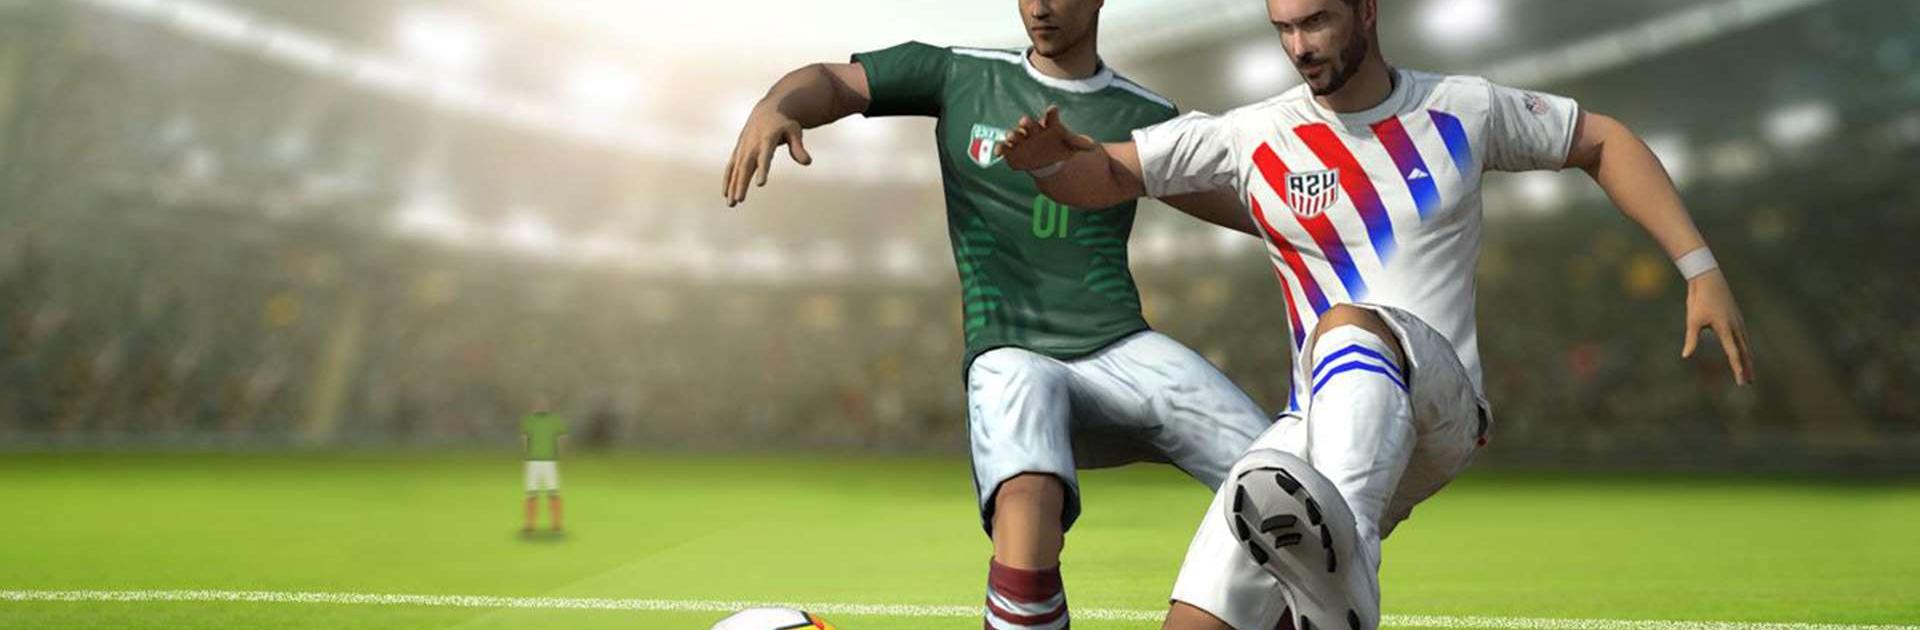 Soccer Cup 2022: Football Game